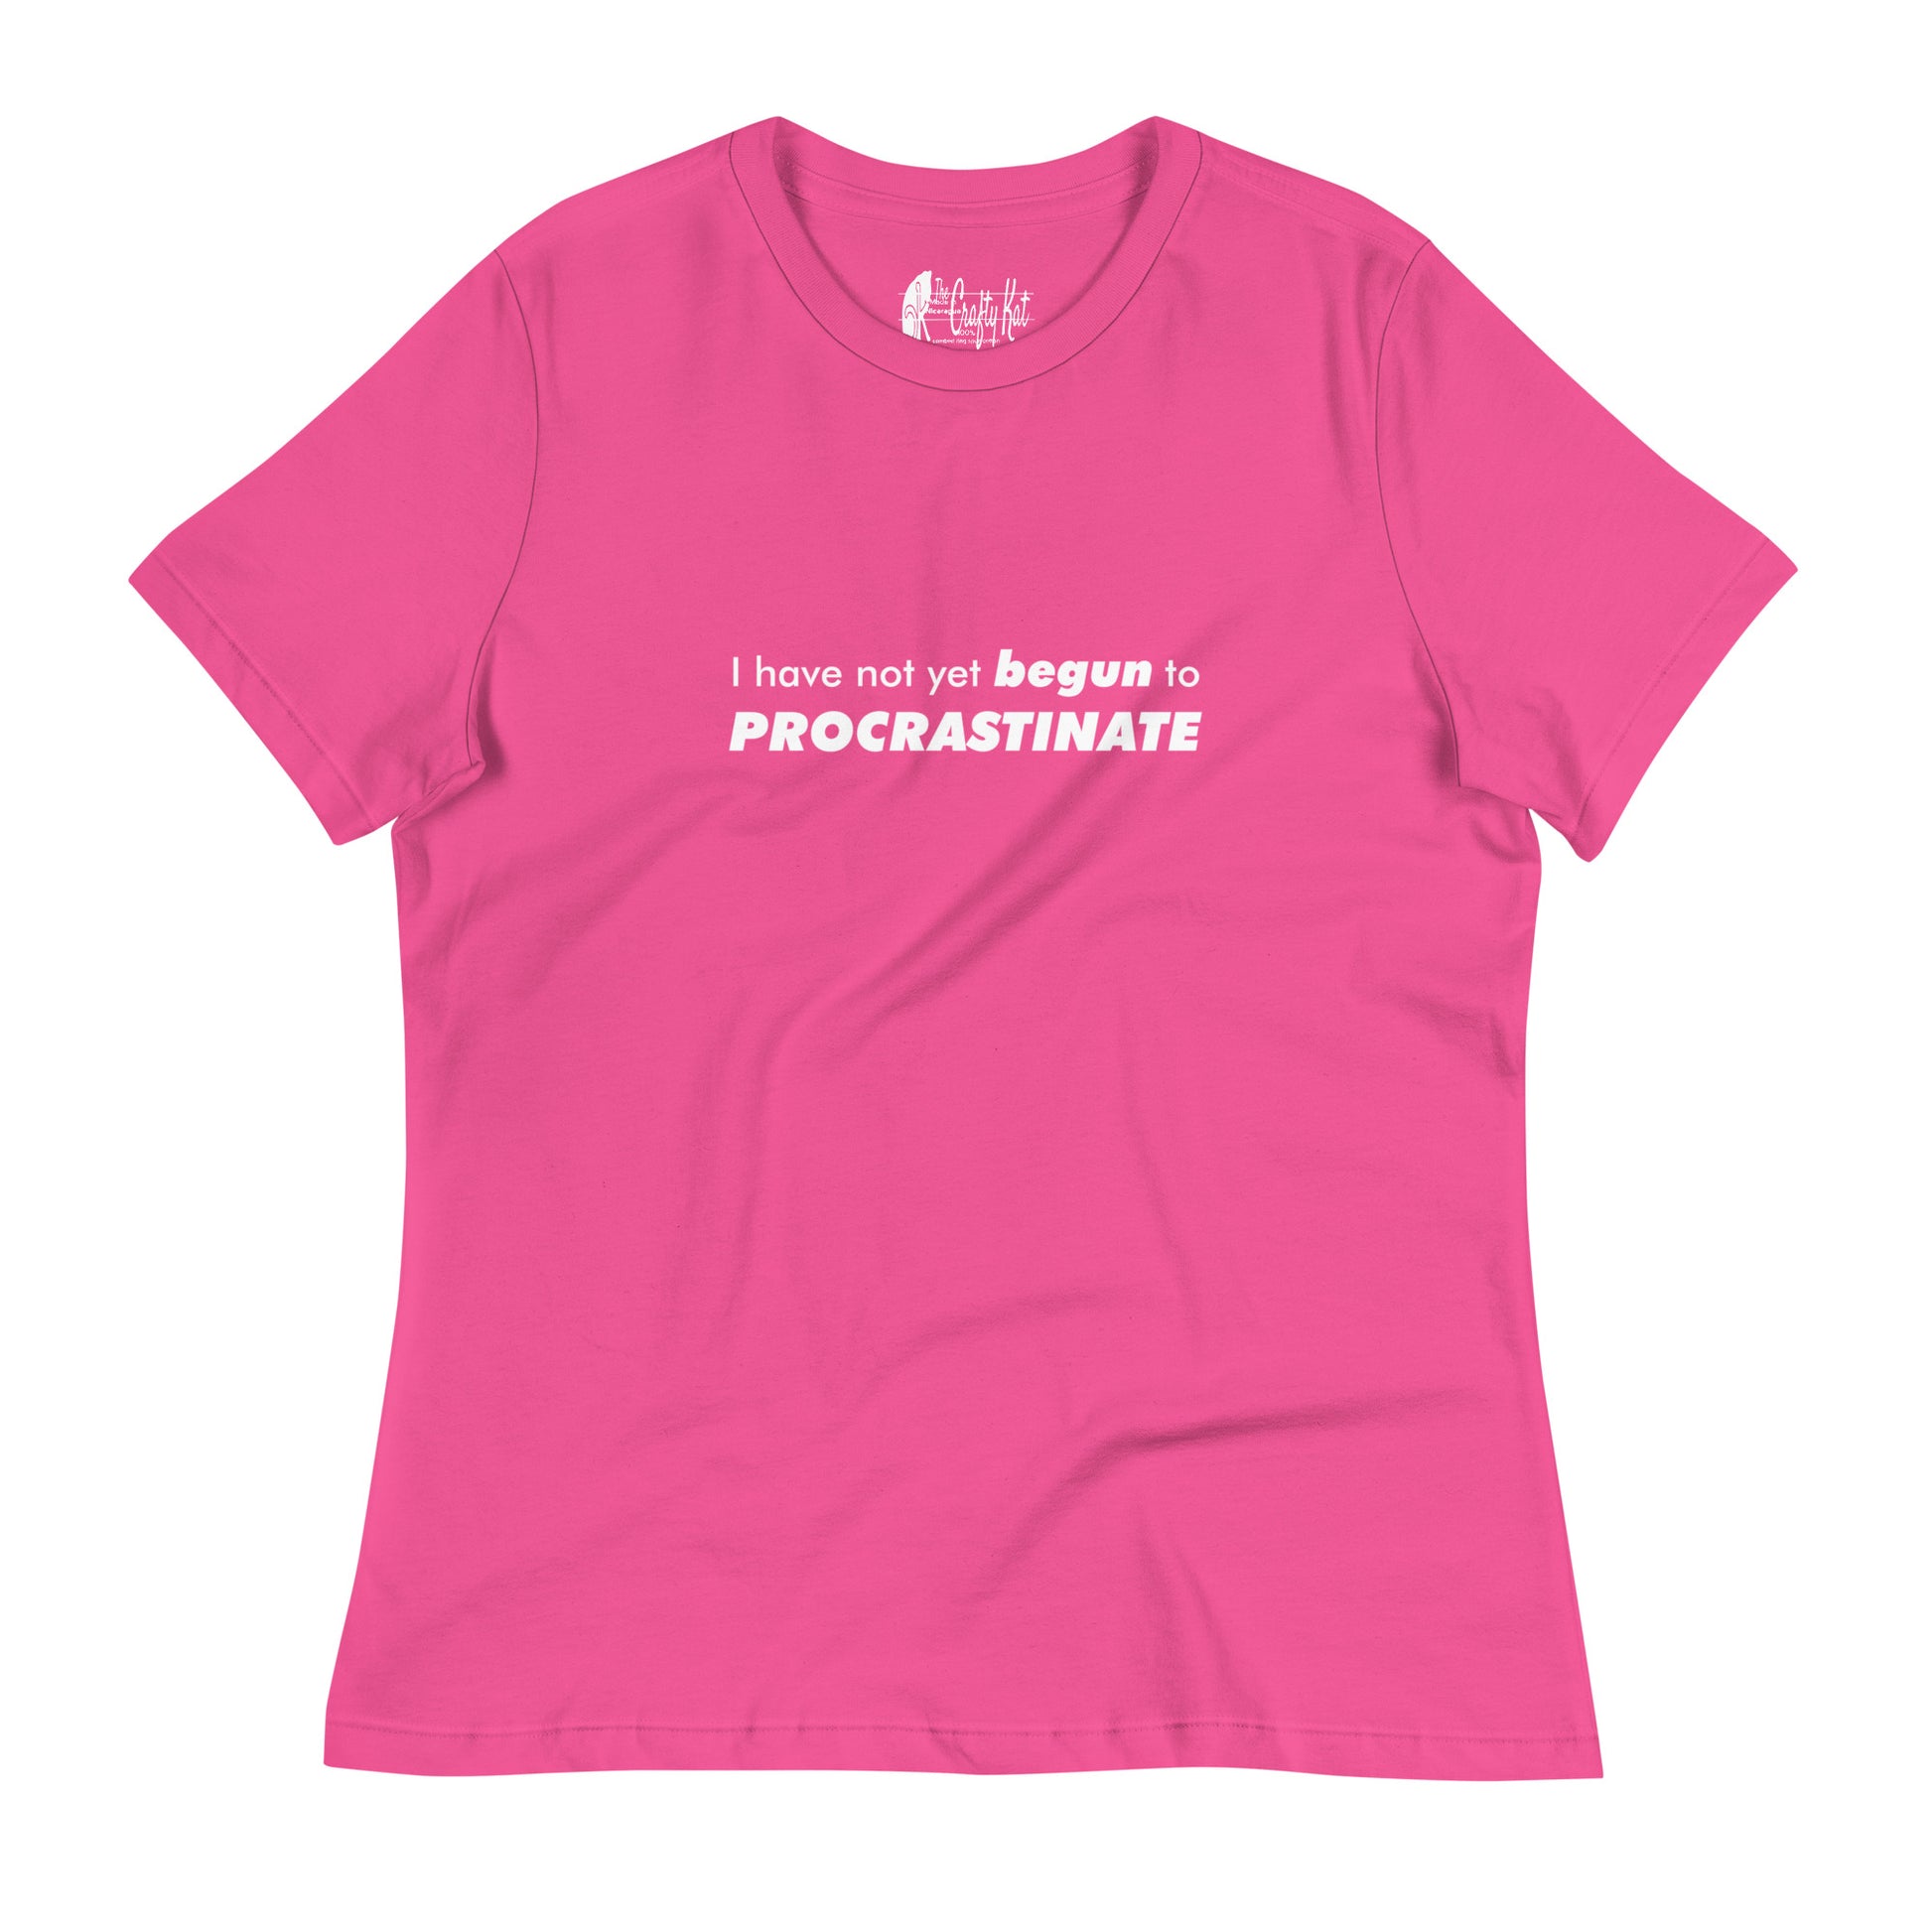 Berry (magenta) women's relaxed-fit t-shirt with text graphic: "I have not yet BEGUN to PROCRASTINATE"